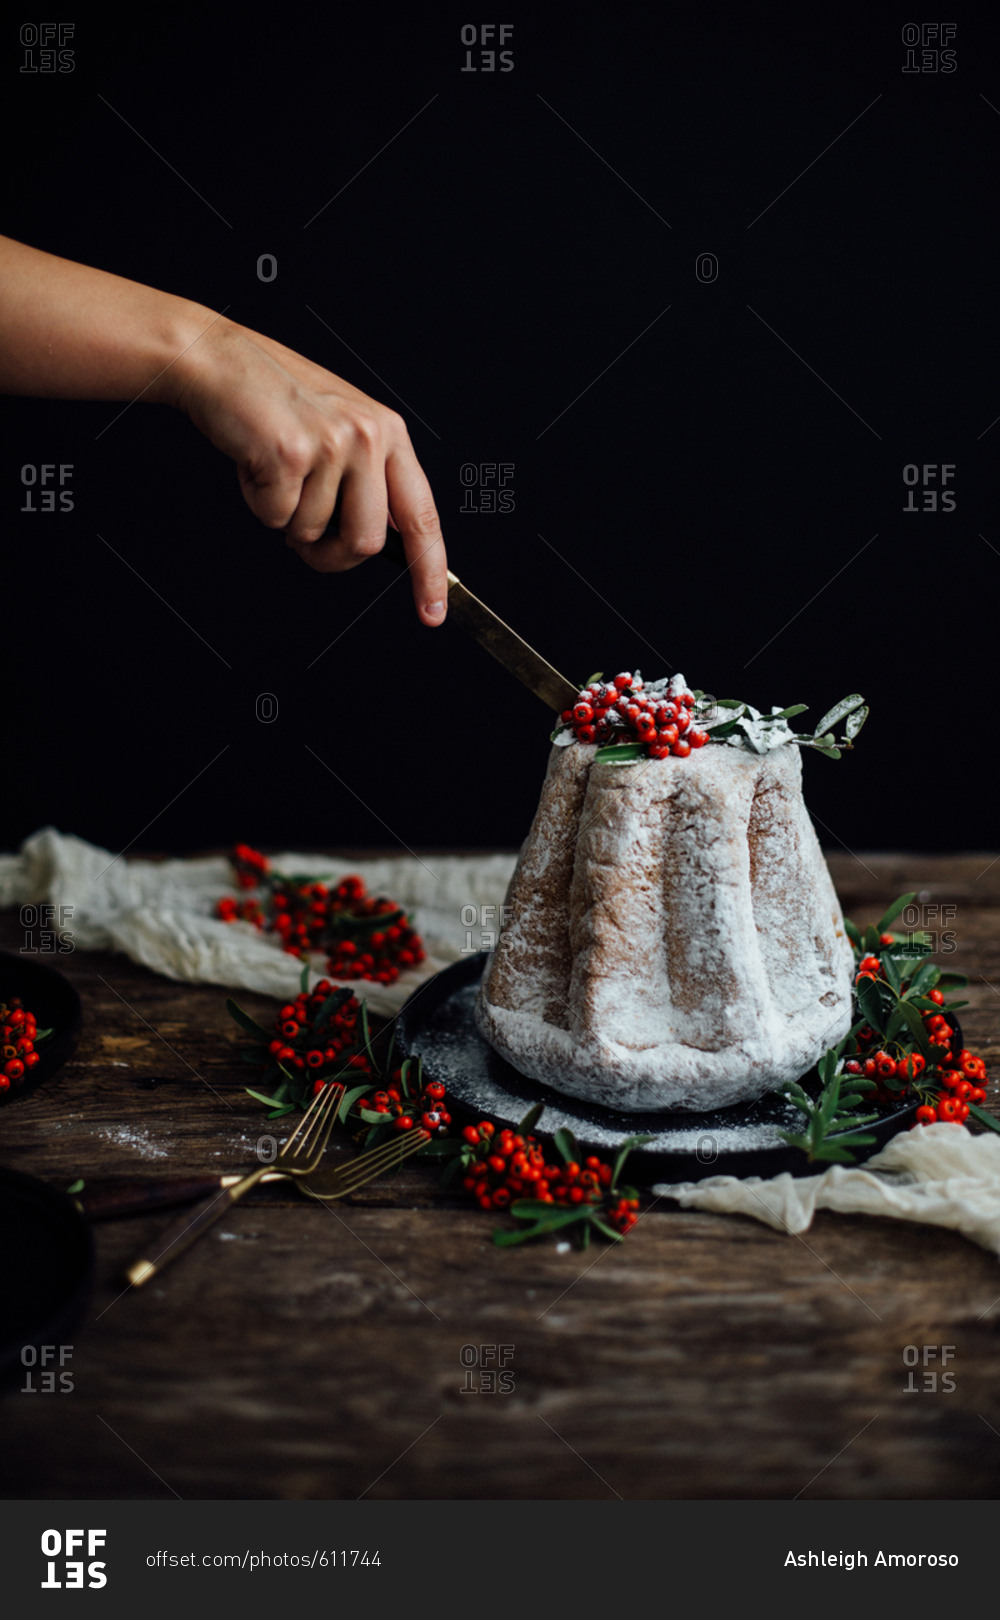 Woman slicing a holiday cake toped with powdered sugar and berries